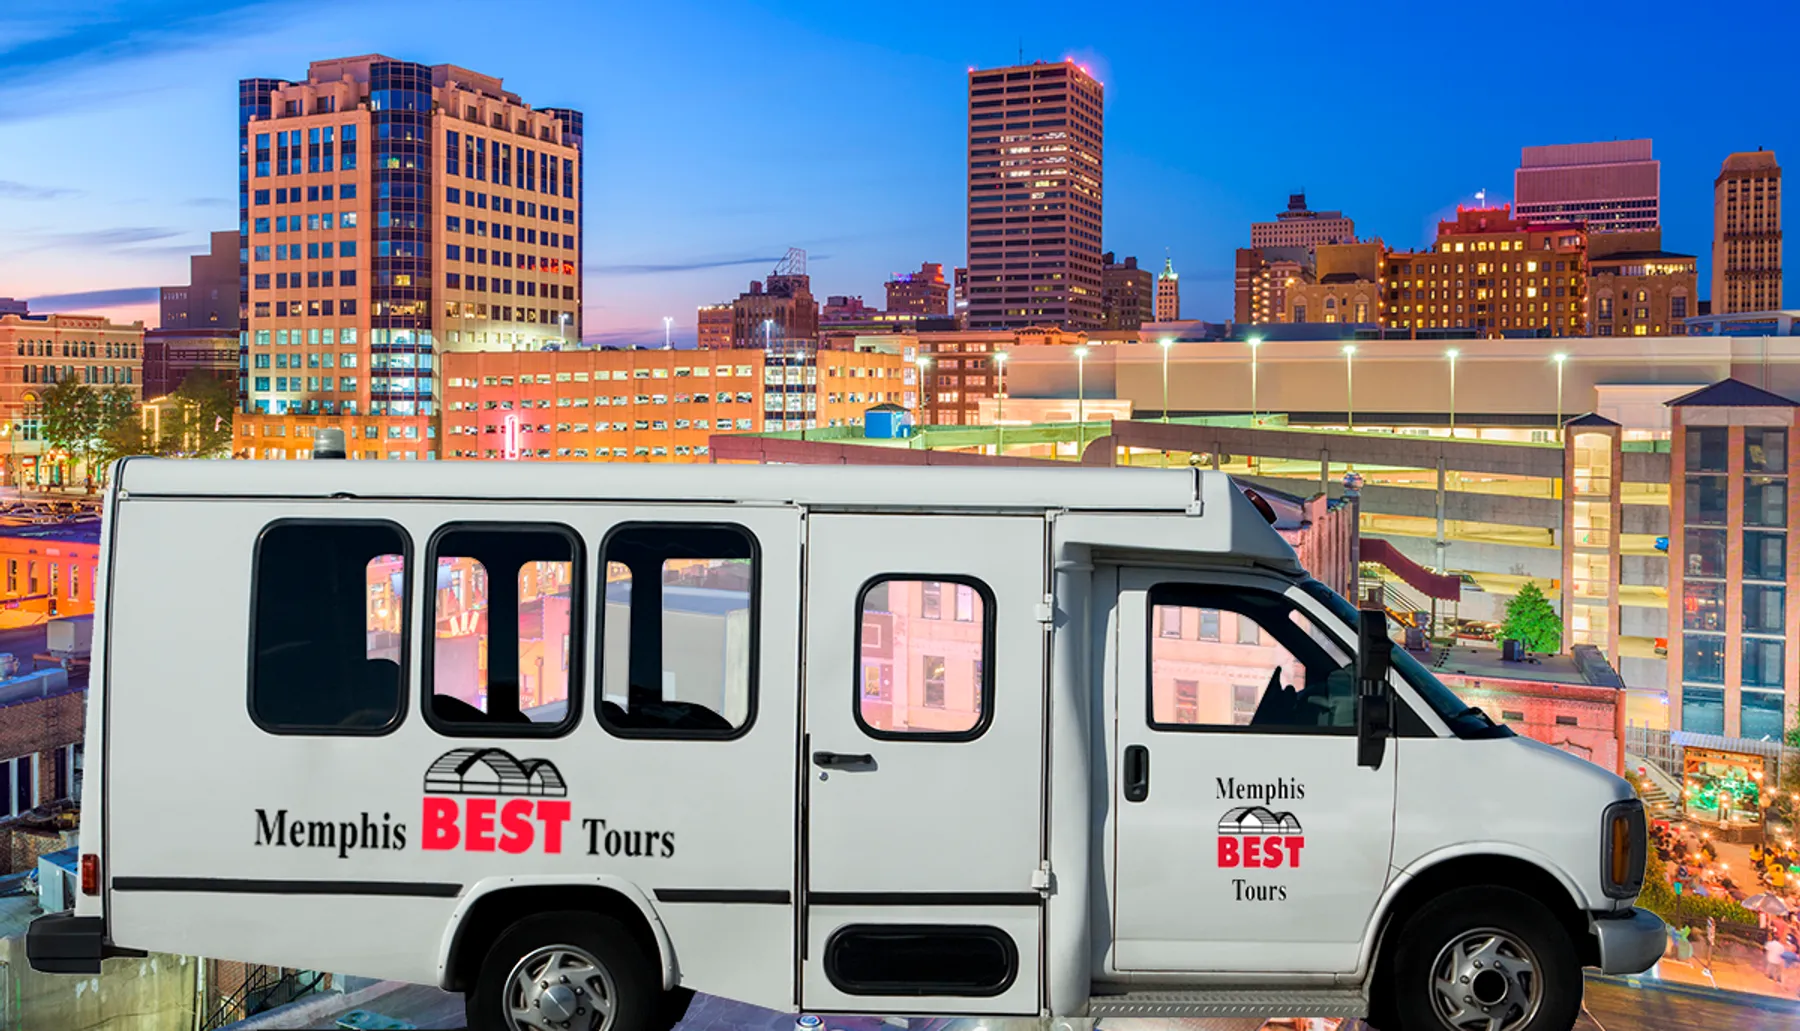 A tour van with Memphis BEST Tours on its side is parked with a backdrop of the Memphis skyline at twilight.